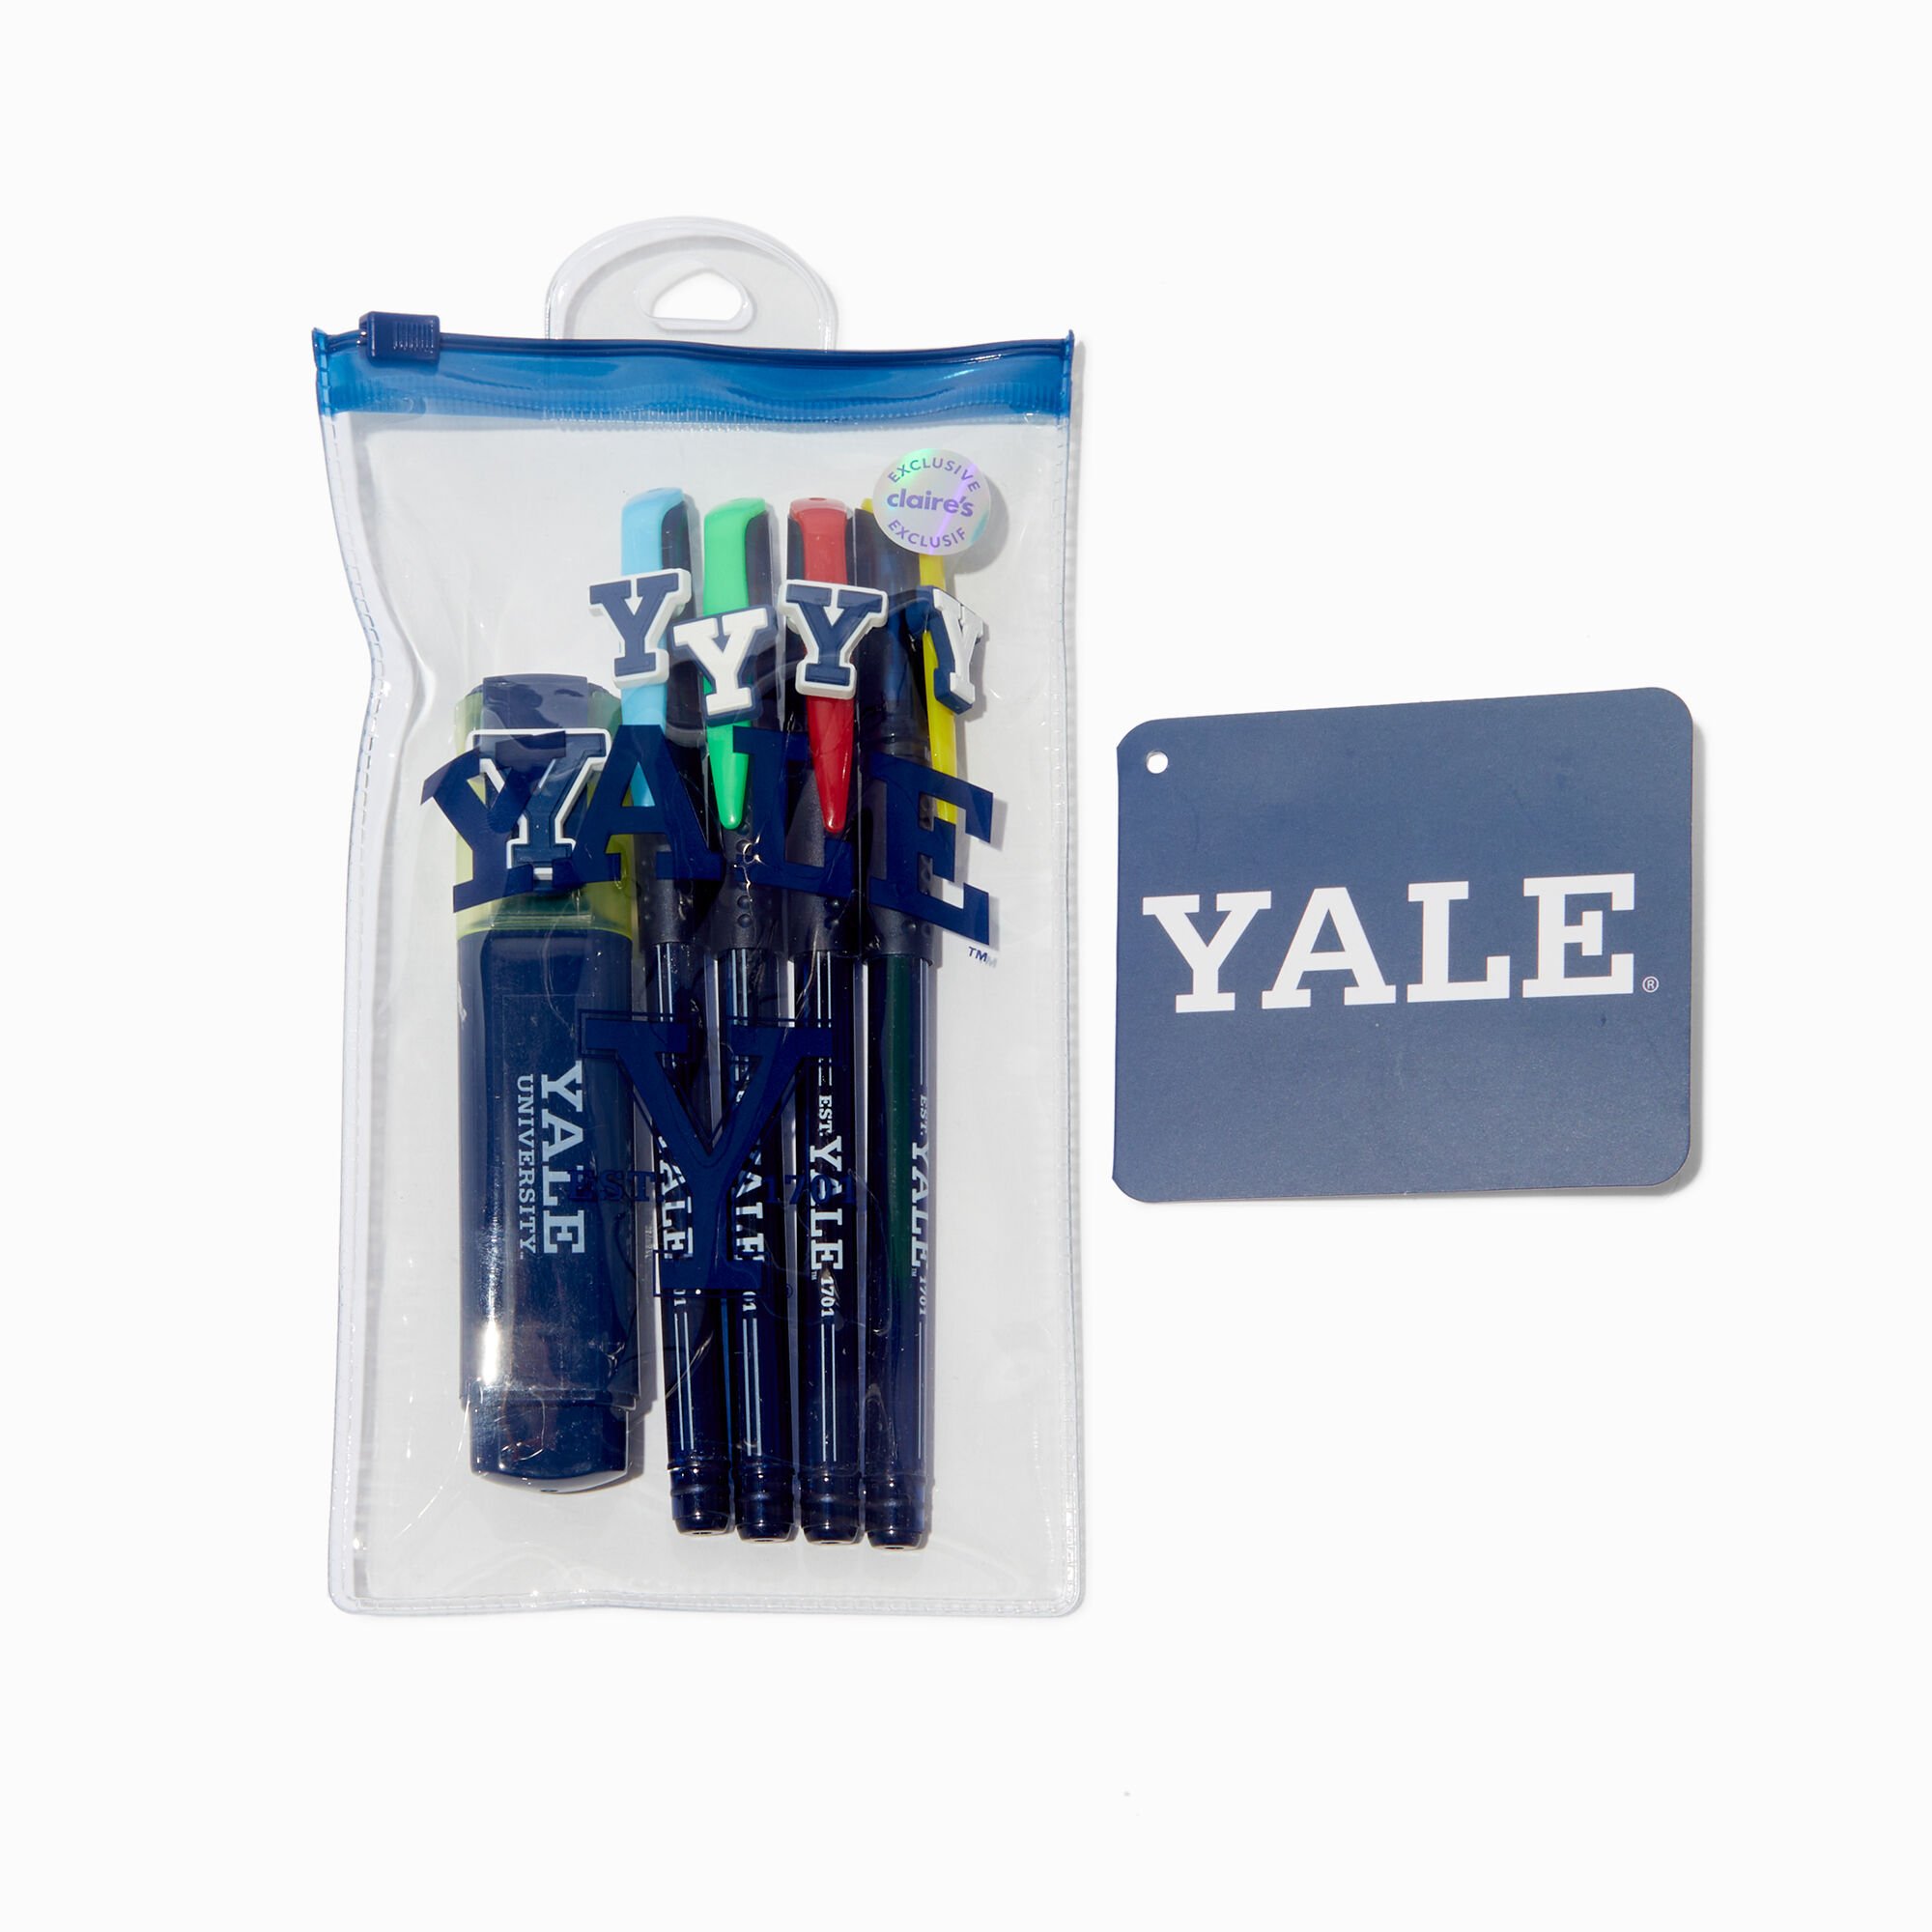 View Yale Claires Exclusive Highlighter Pen Set 5 Pack Yellow information